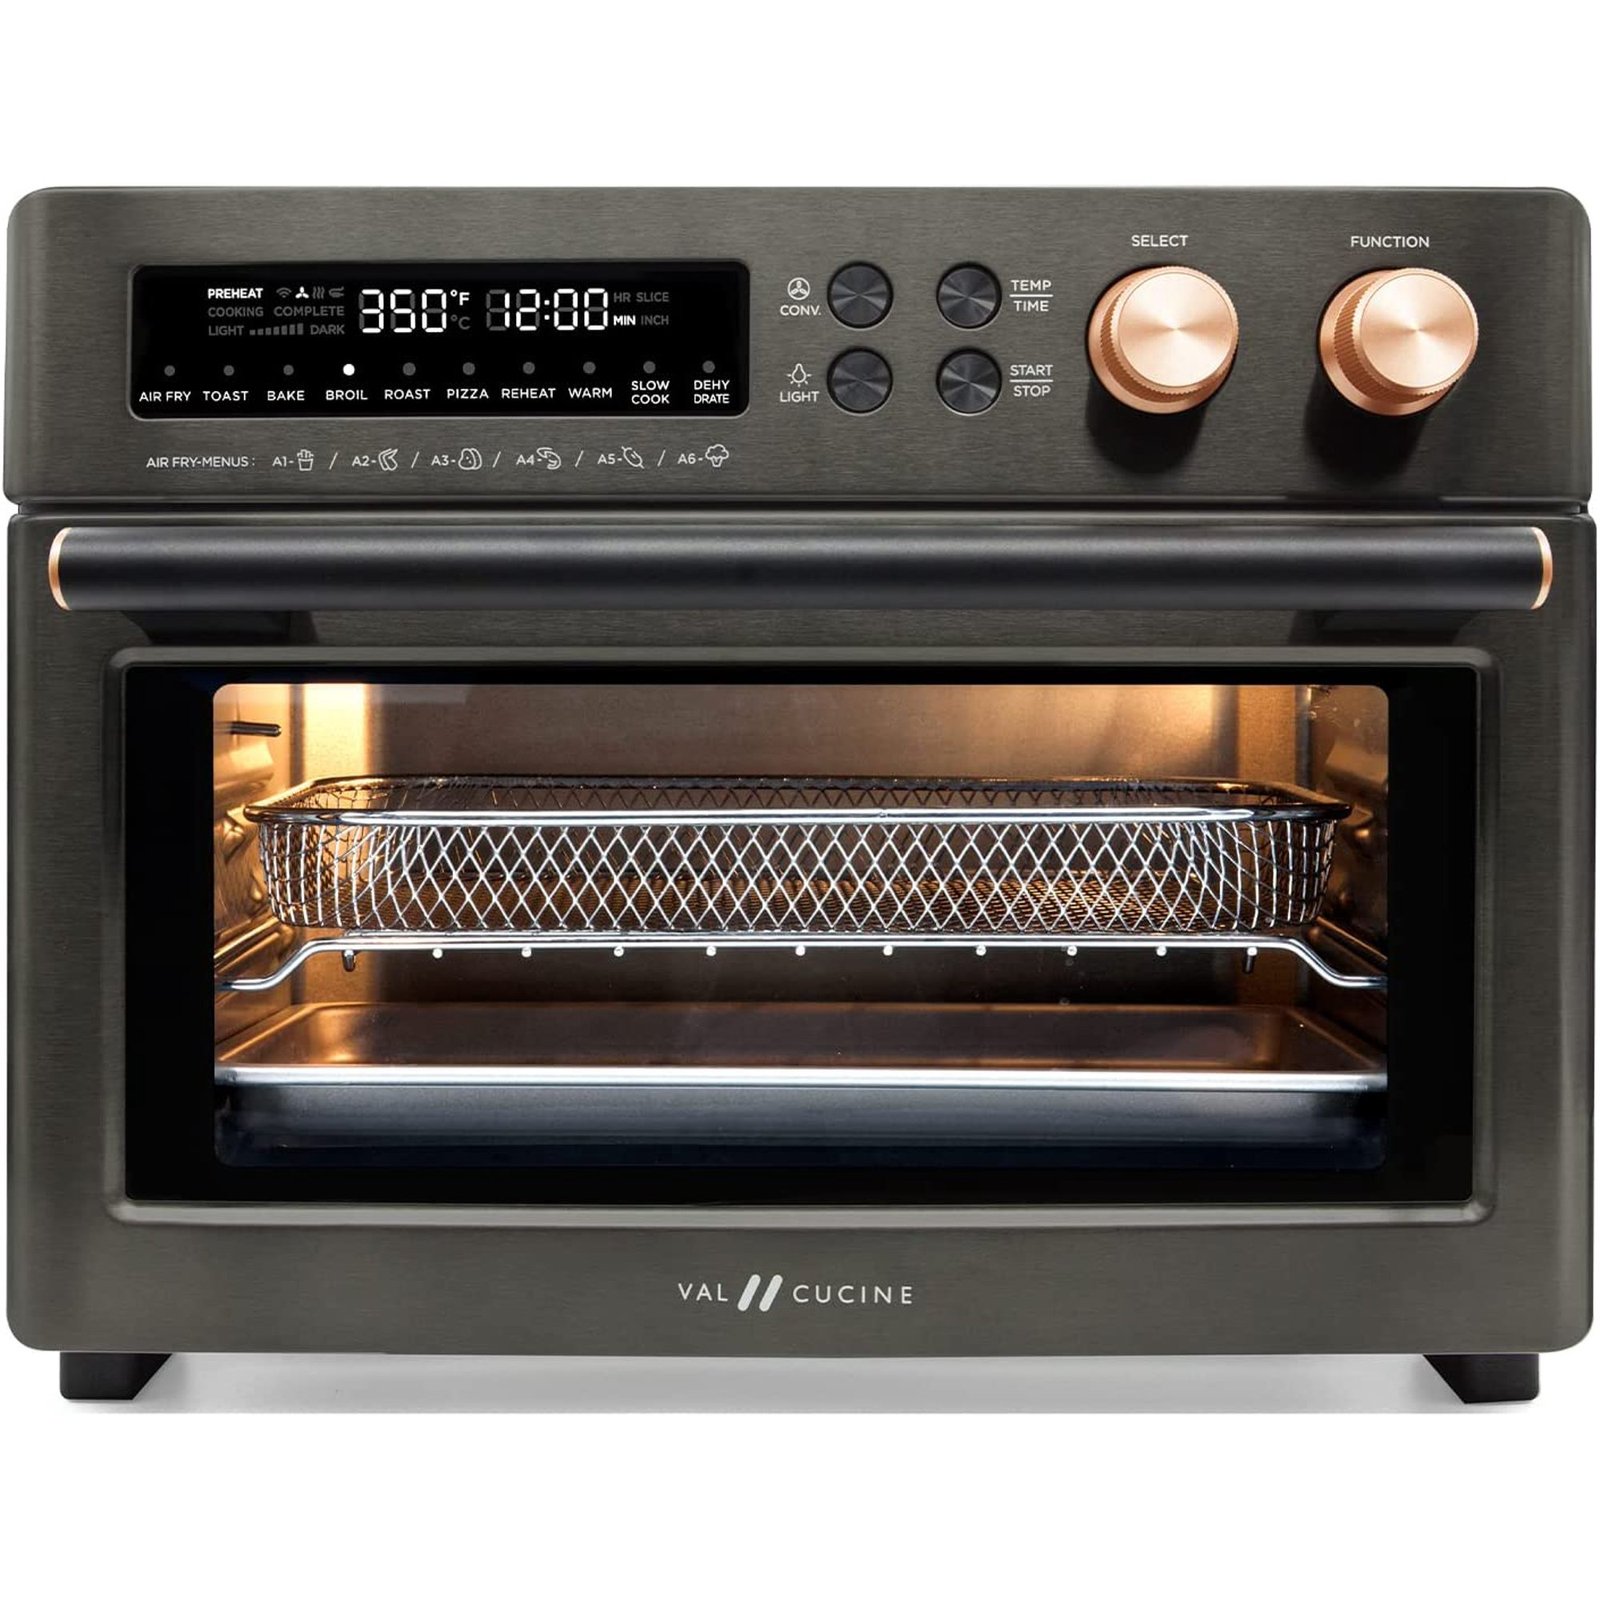 https://themarketdepot.com/wp-content/uploads/2023/01/FSXUOLIPI-26.3-QT25-L-Extra-Large-Smart-Air-Fryer-Toaster-Oven-10-in-1-Convection-Countertop-Oven-Combination-Black-Matte-Stainless-Steel-1.jpeg